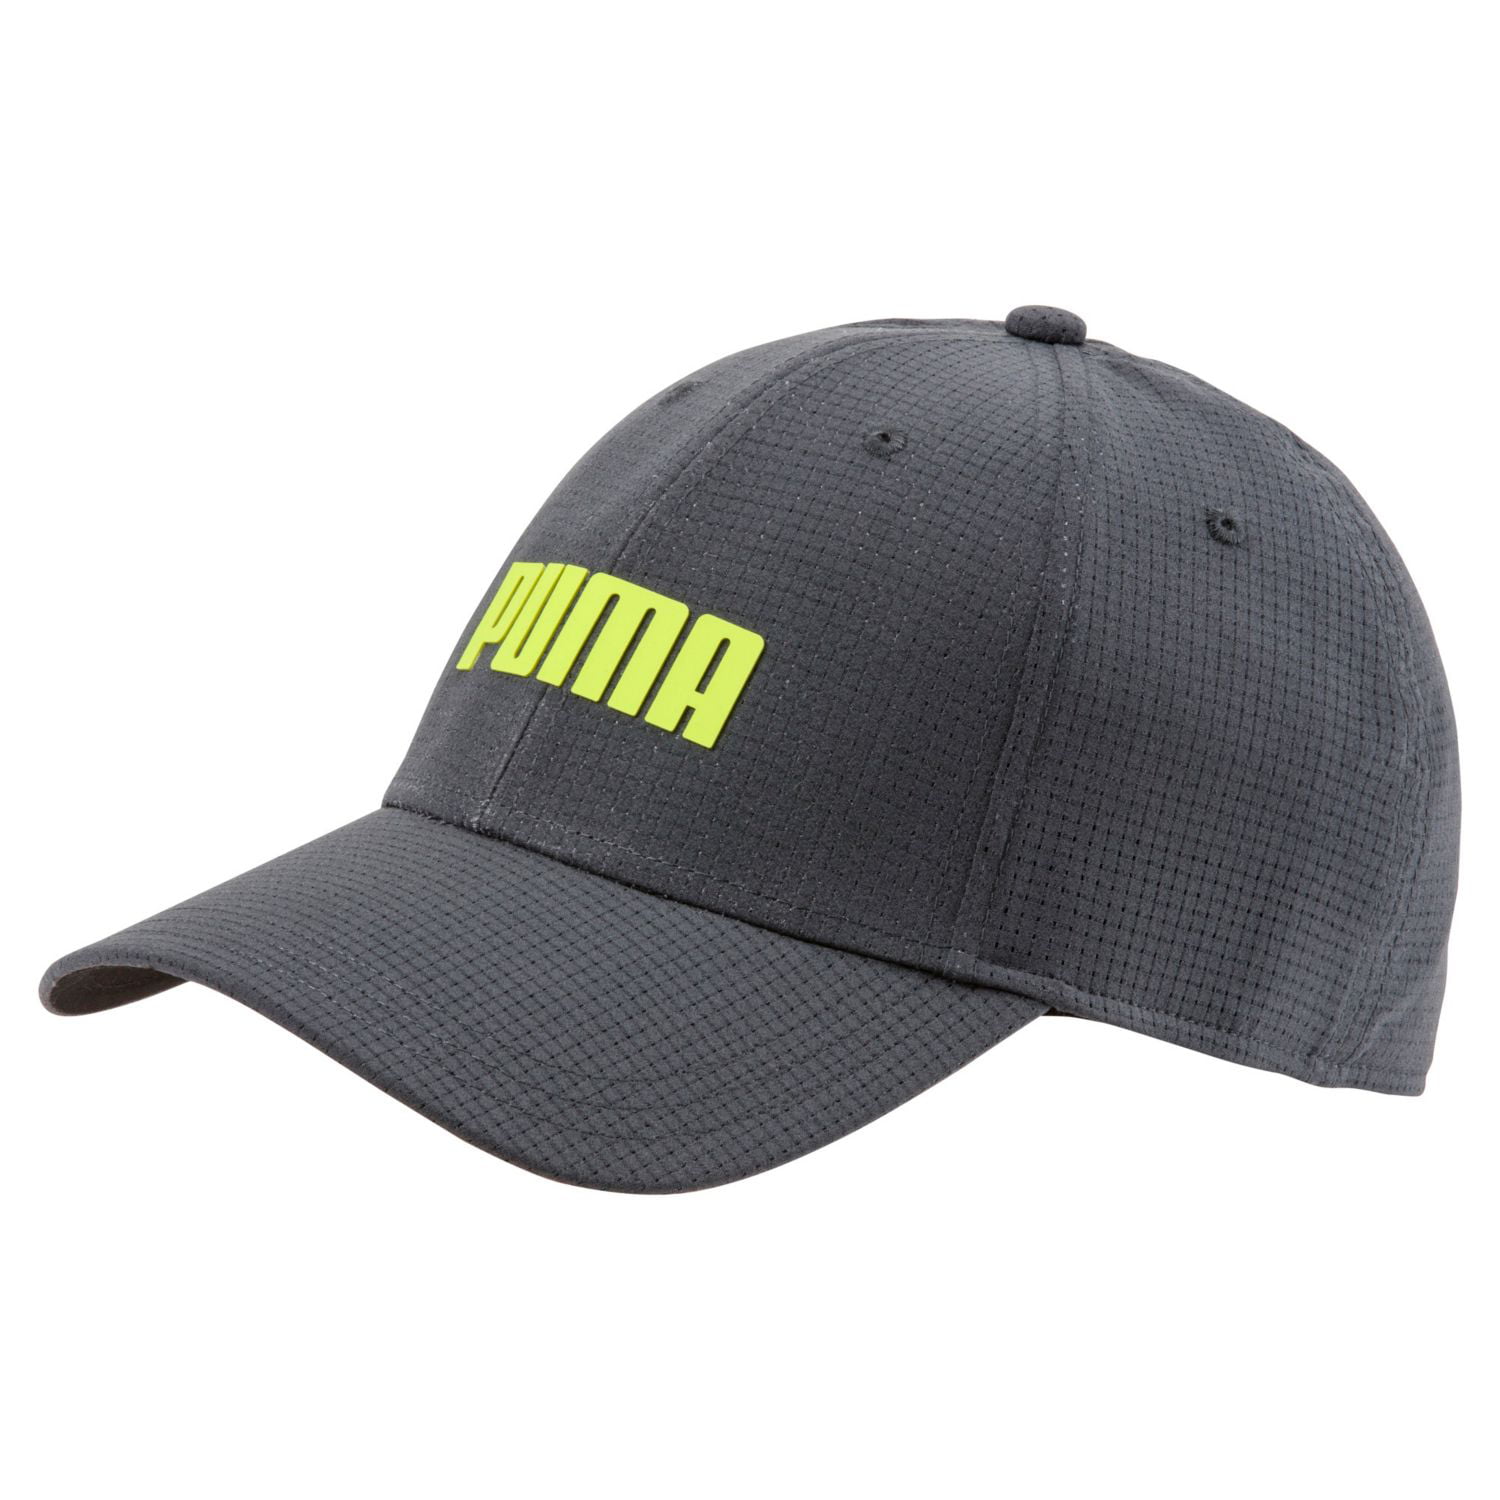 puma fitted hat